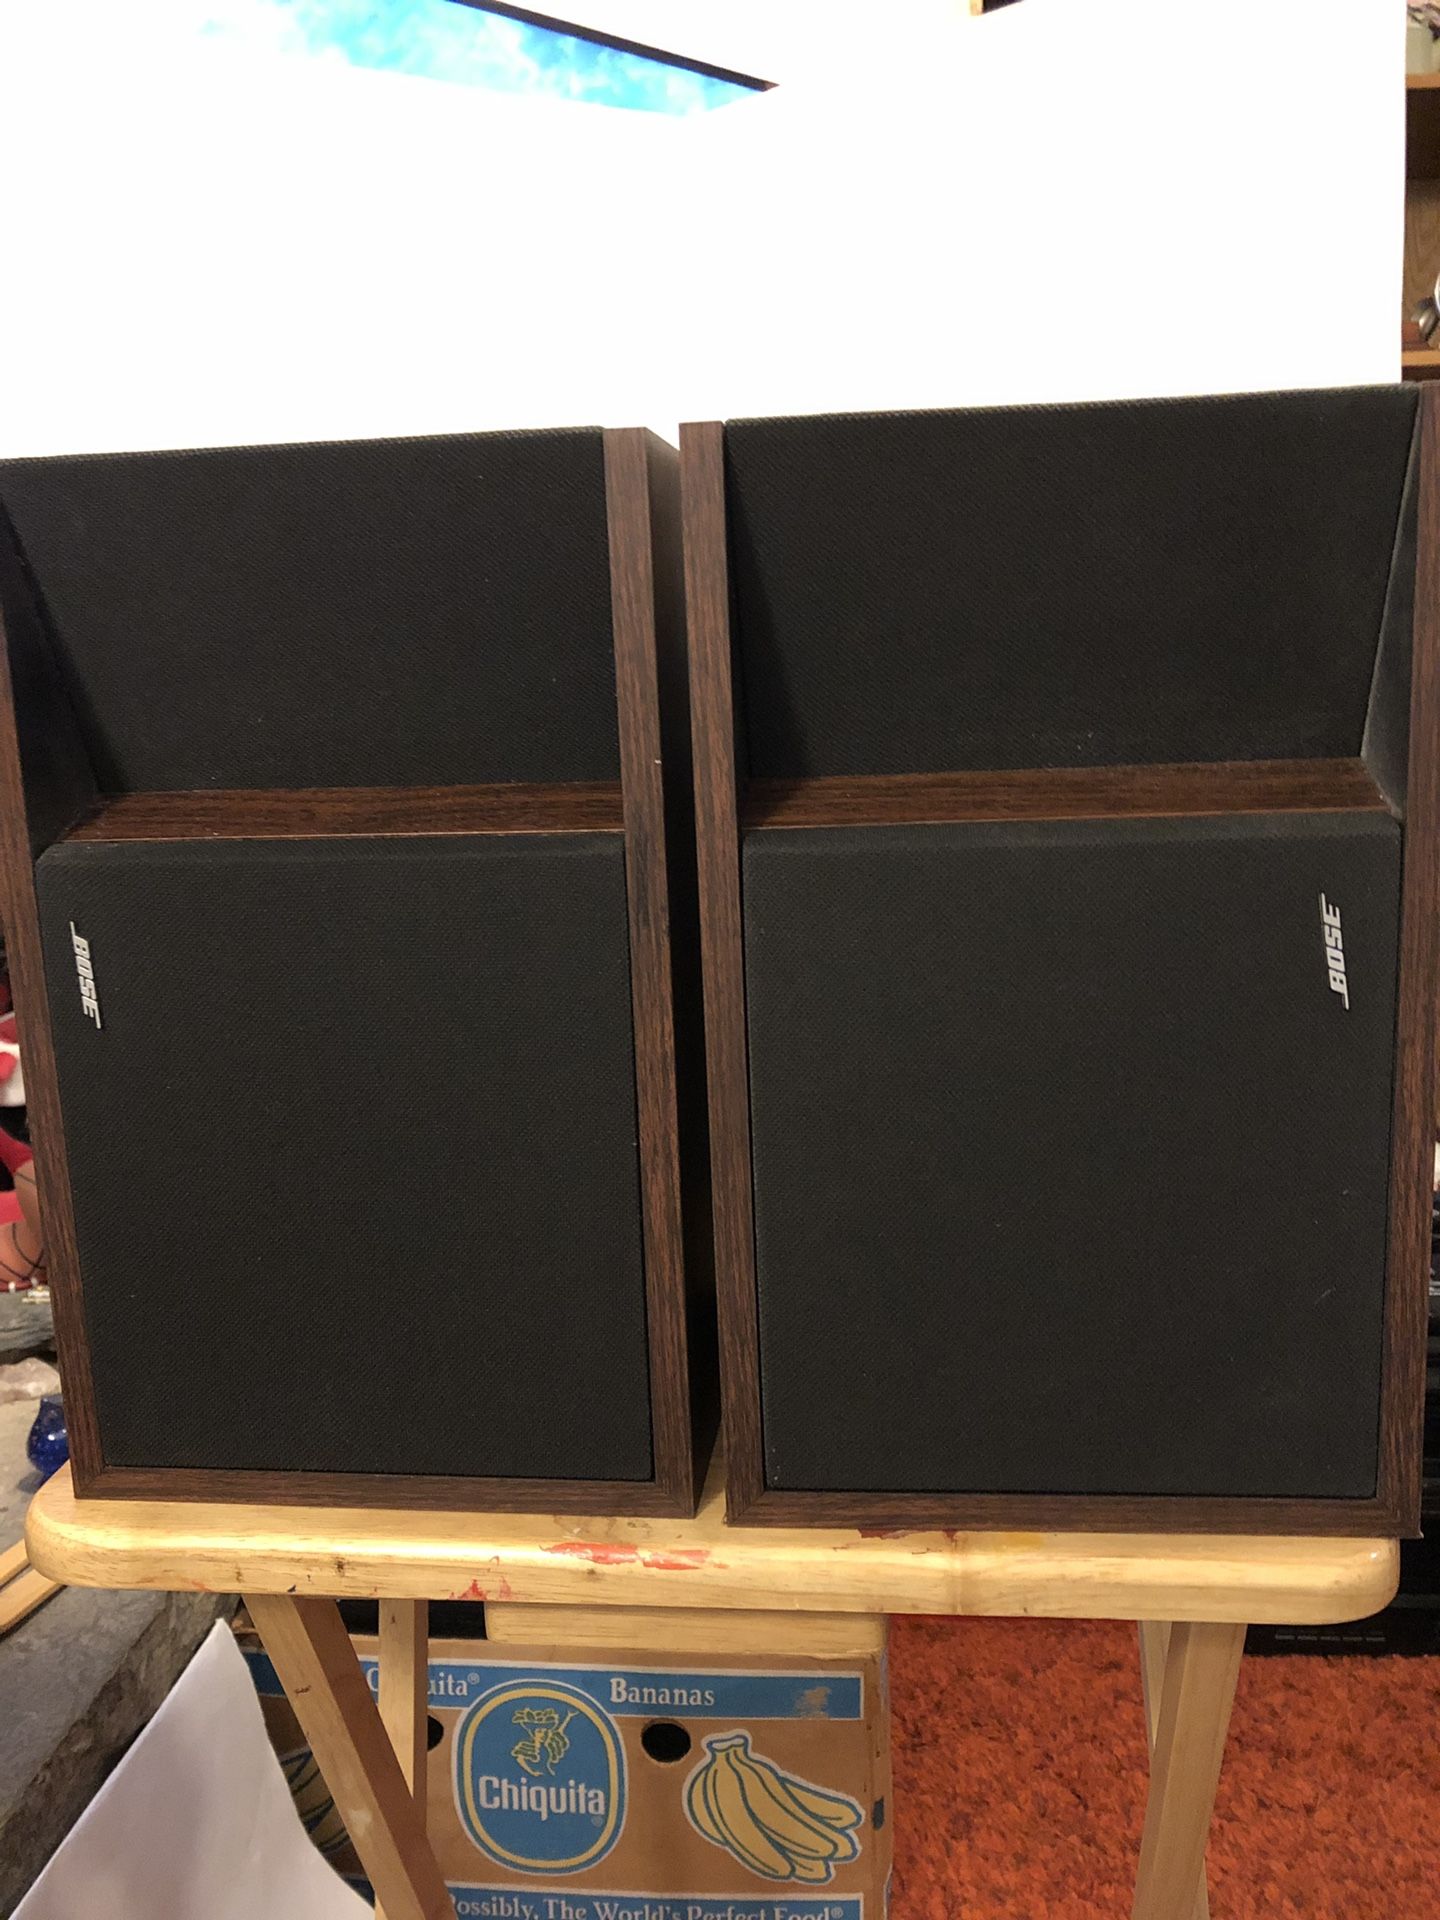 Vintage 1984 Bose 201 Series ll book shelf speakers left and right pick up only Hilliard area